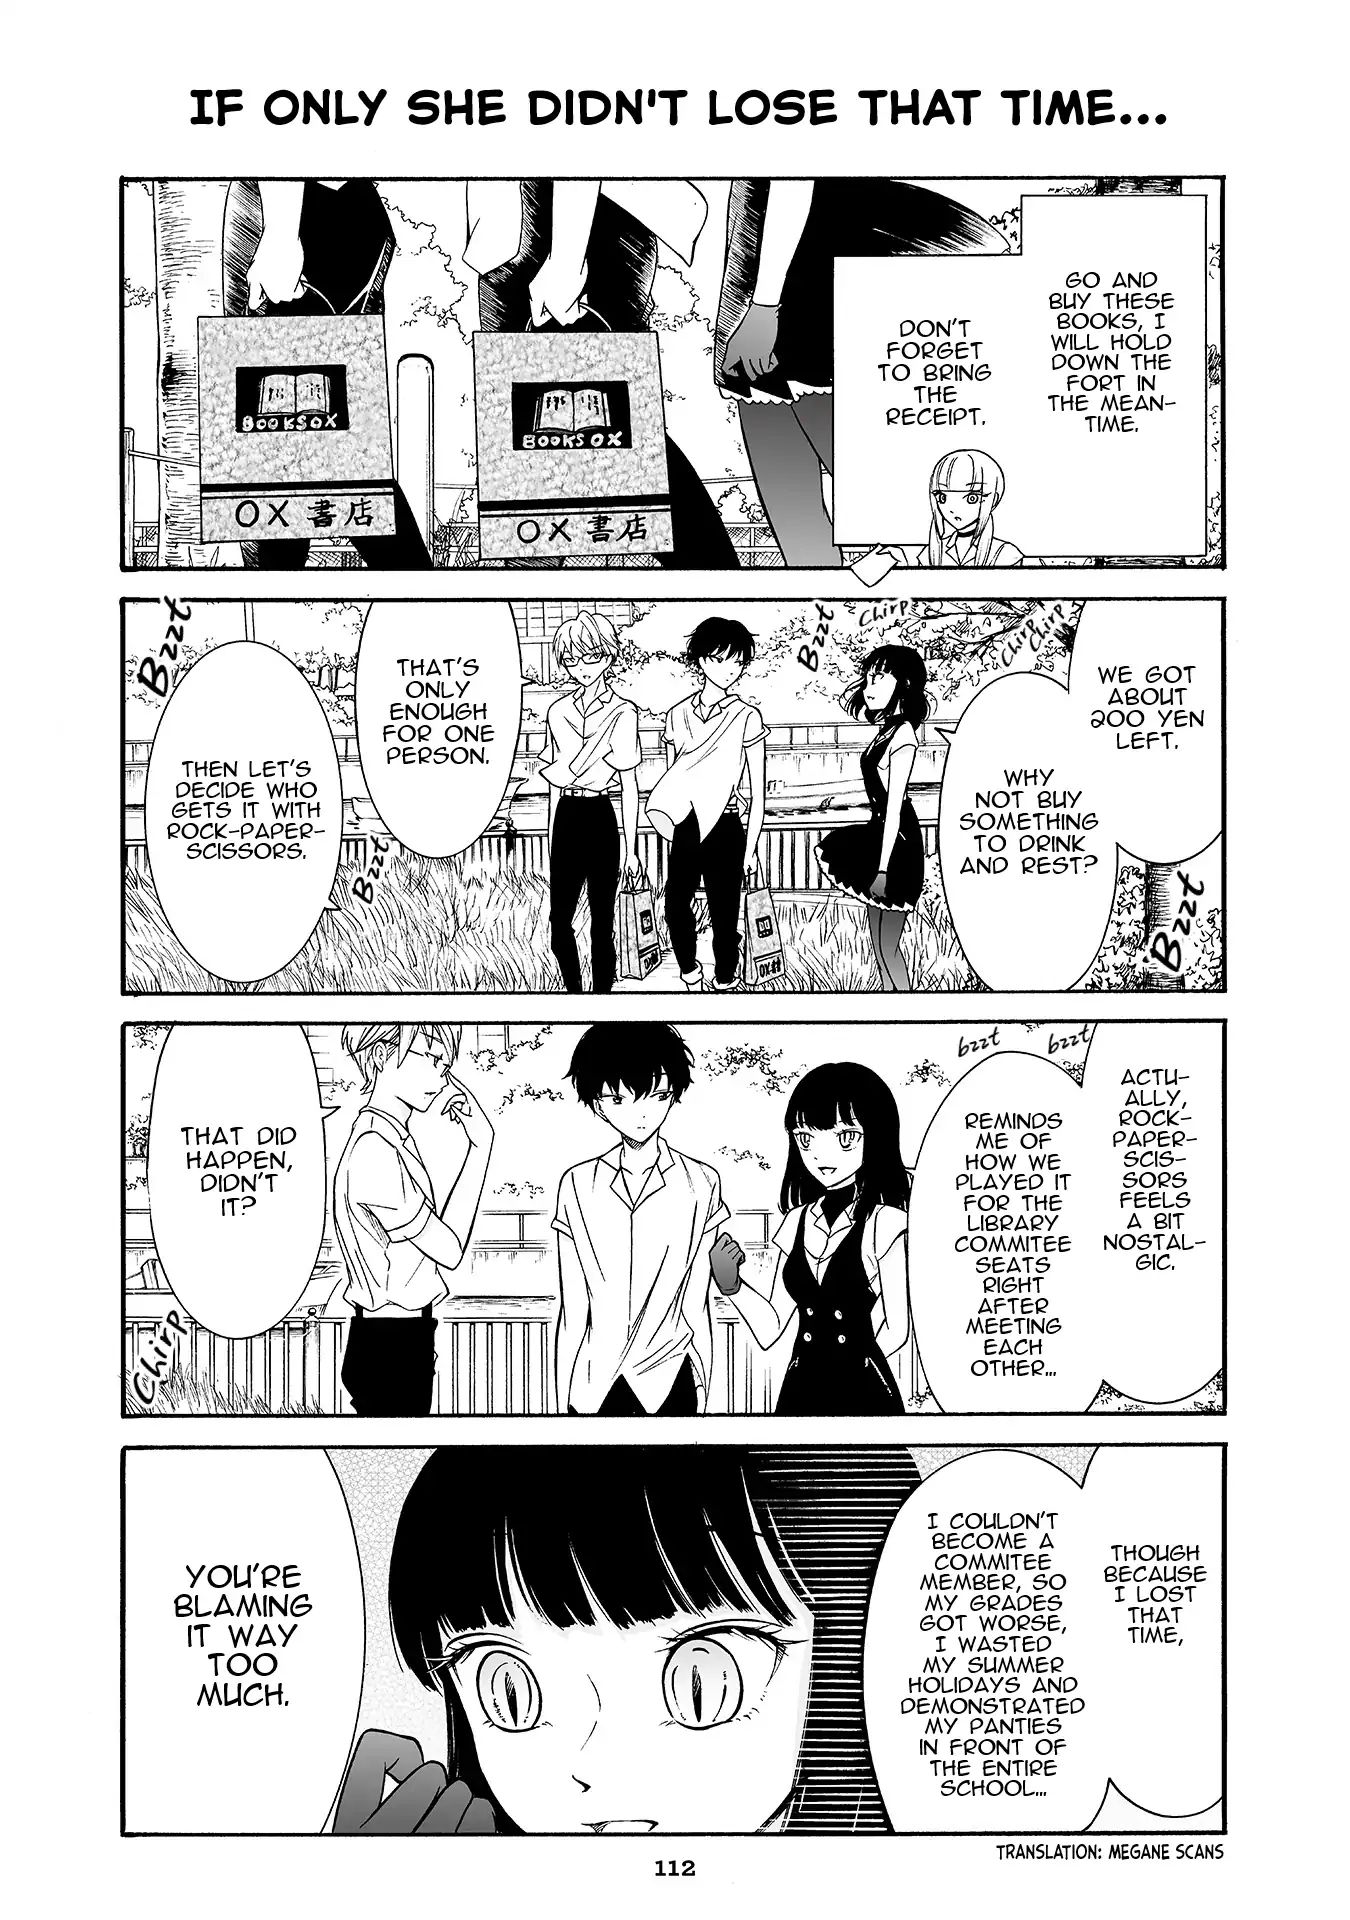 Kuzu to Megane to Bungakushojo (Nise) Vol.2 Chapter 191: If only she didn't lose that time...